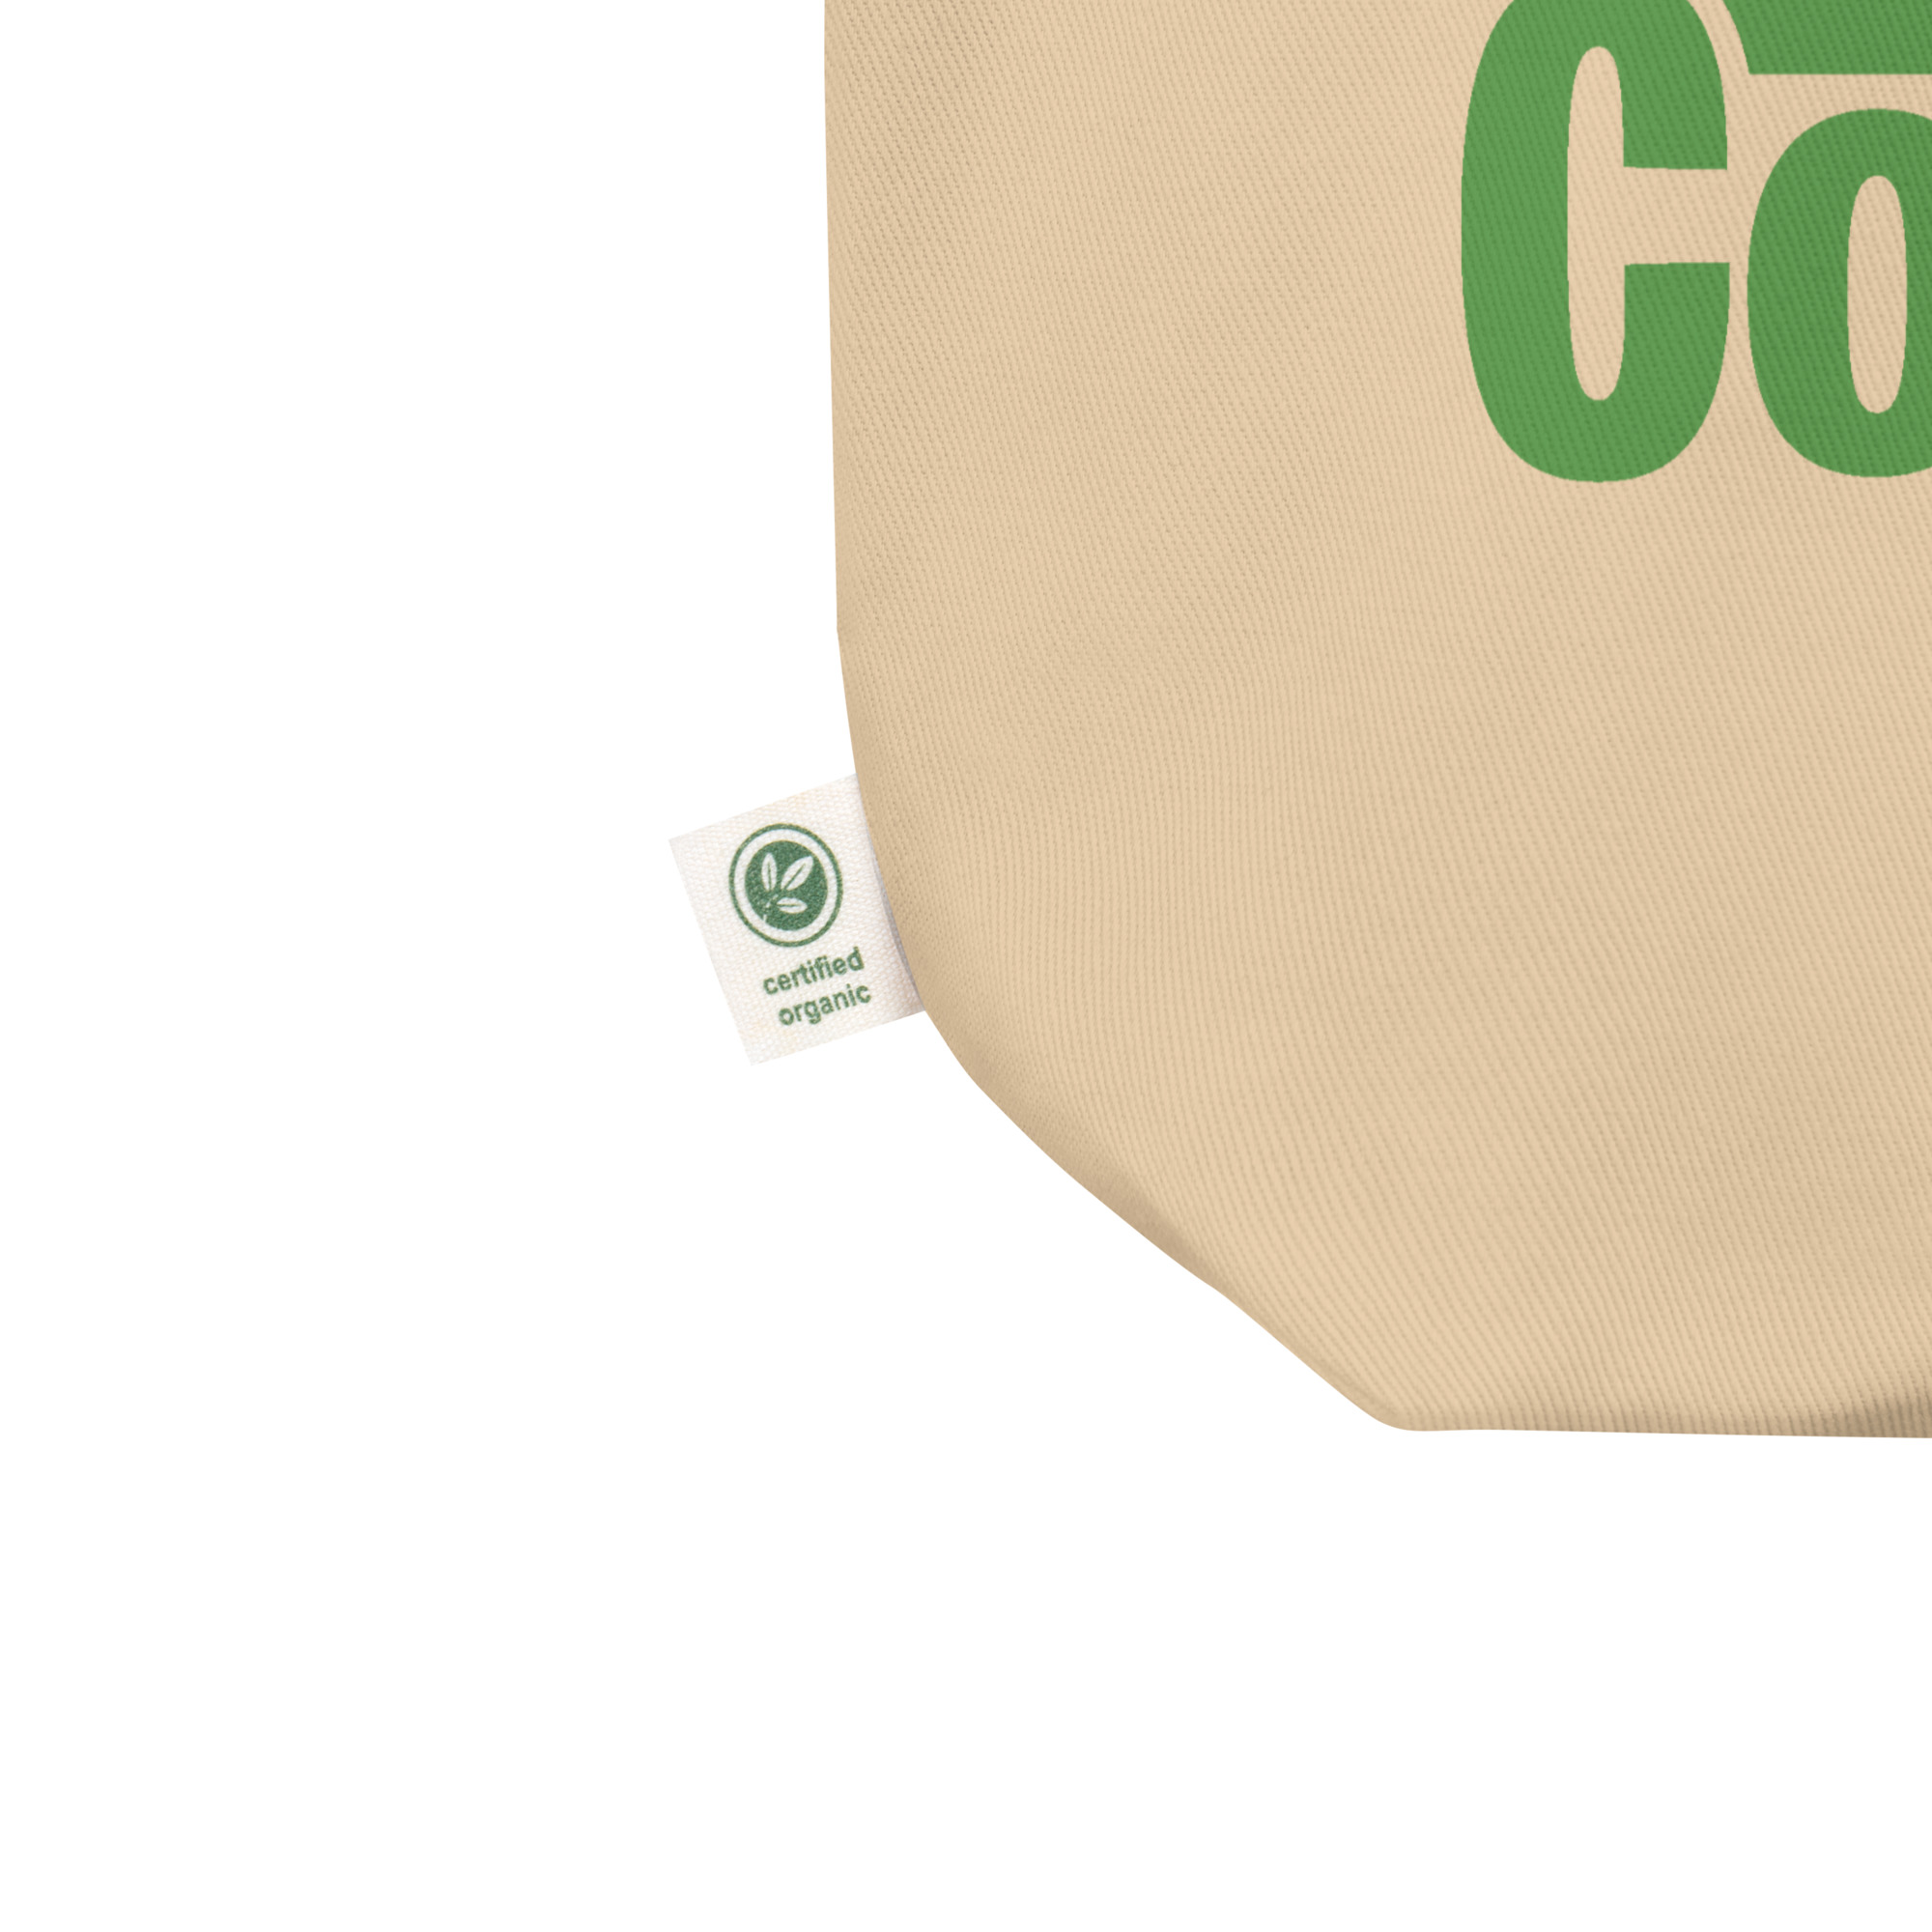 eco-tote-bag-oyster-product-details-64168d0c8adbd.jpg